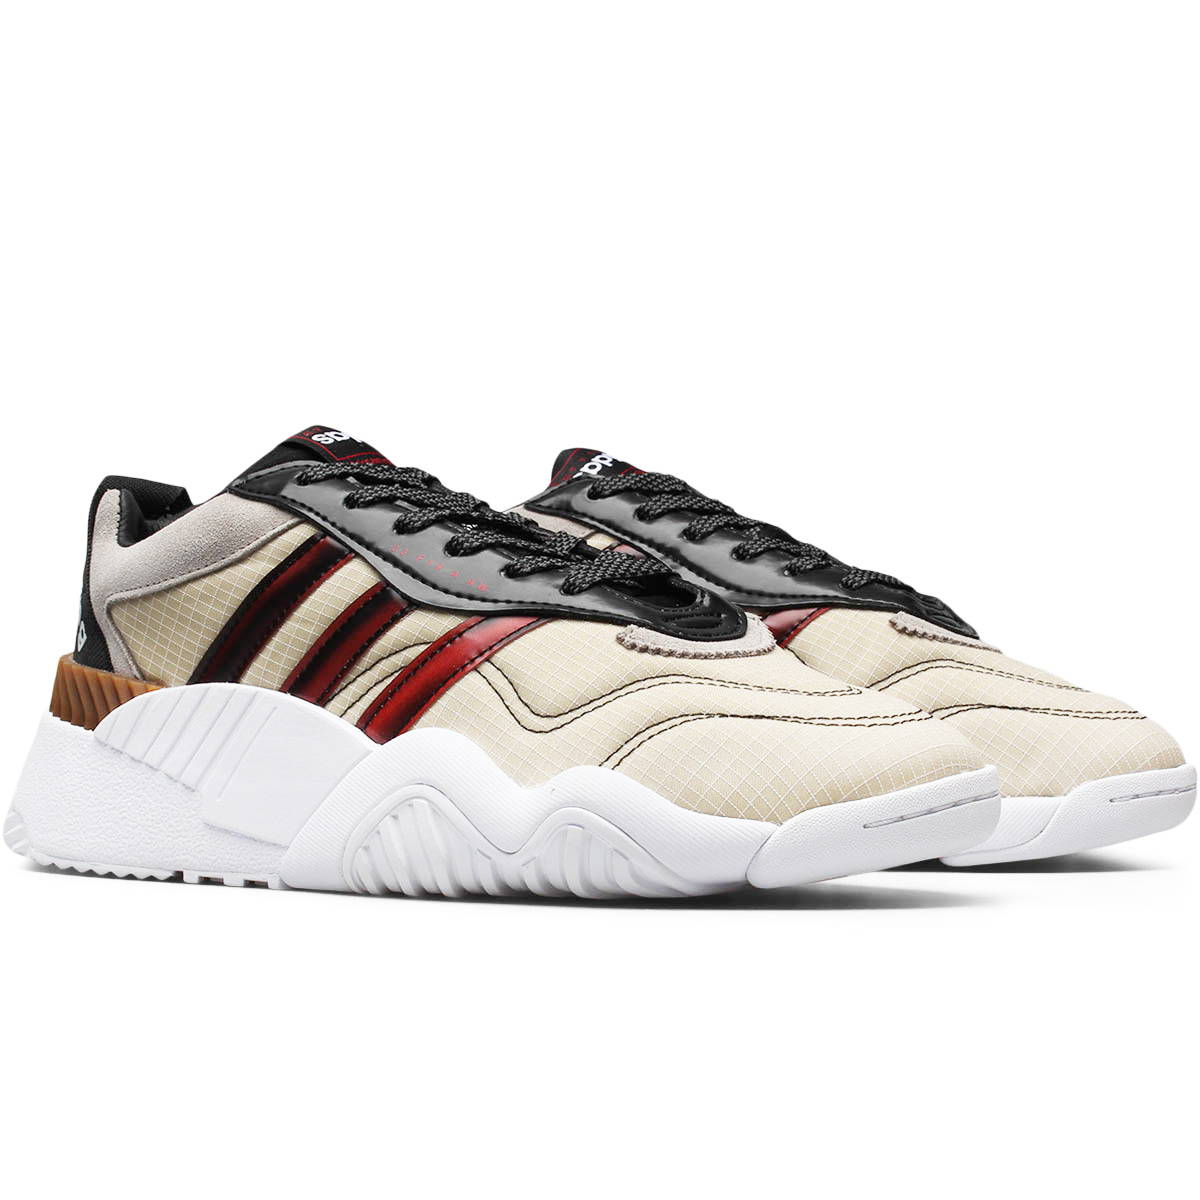 adidas x aw turnout trainer